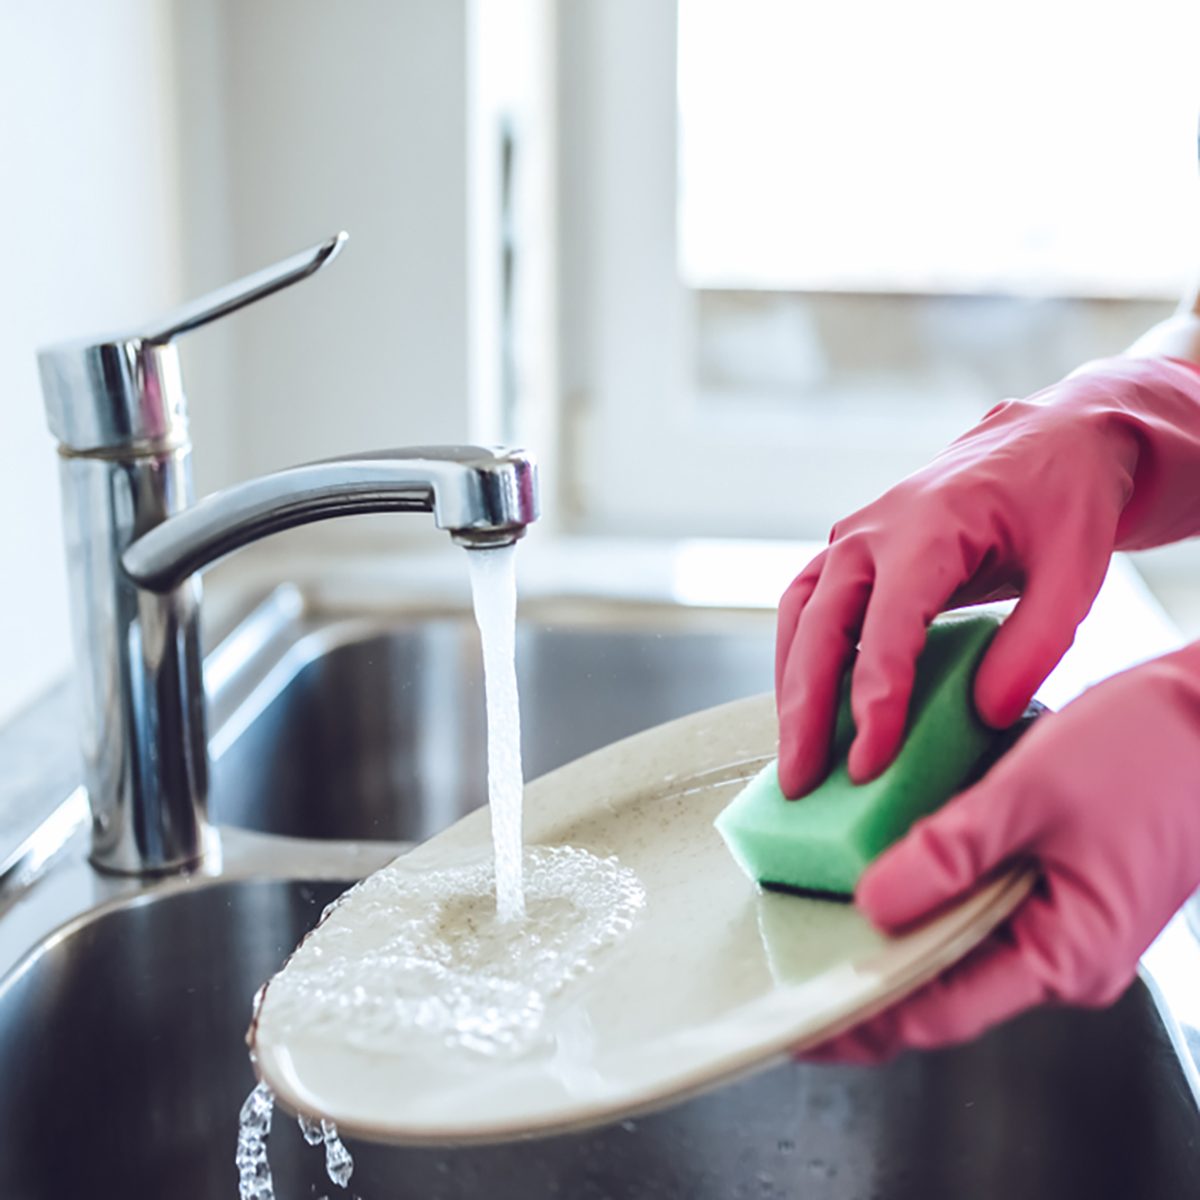 5 Mistakes To Avoid When Hand-Washing Your Dishes